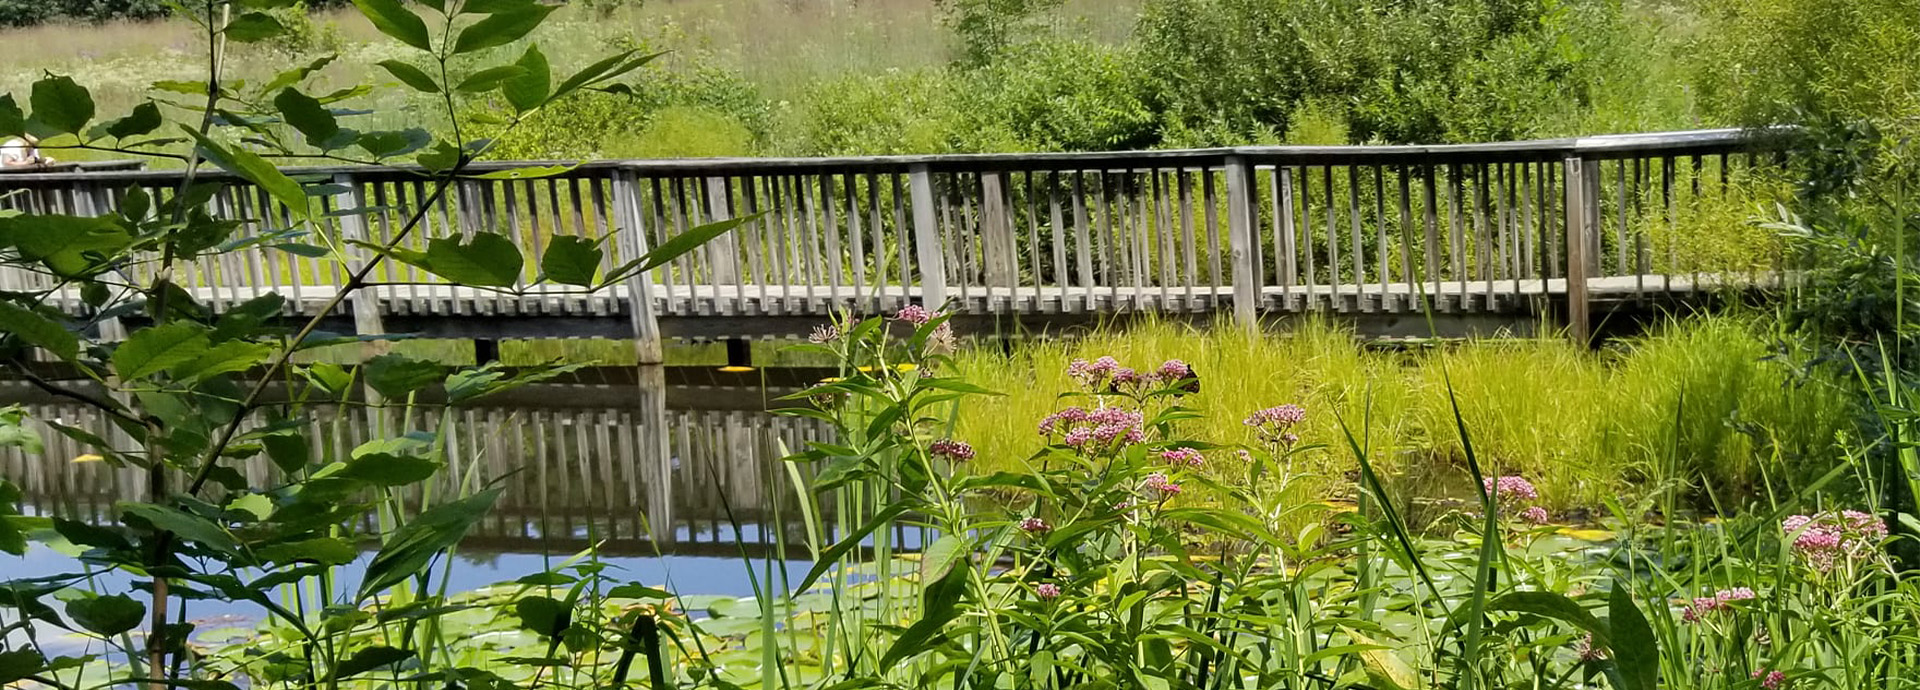 Slideshow Image - Native plants and wildflowers growing in and around the main pond at GNC